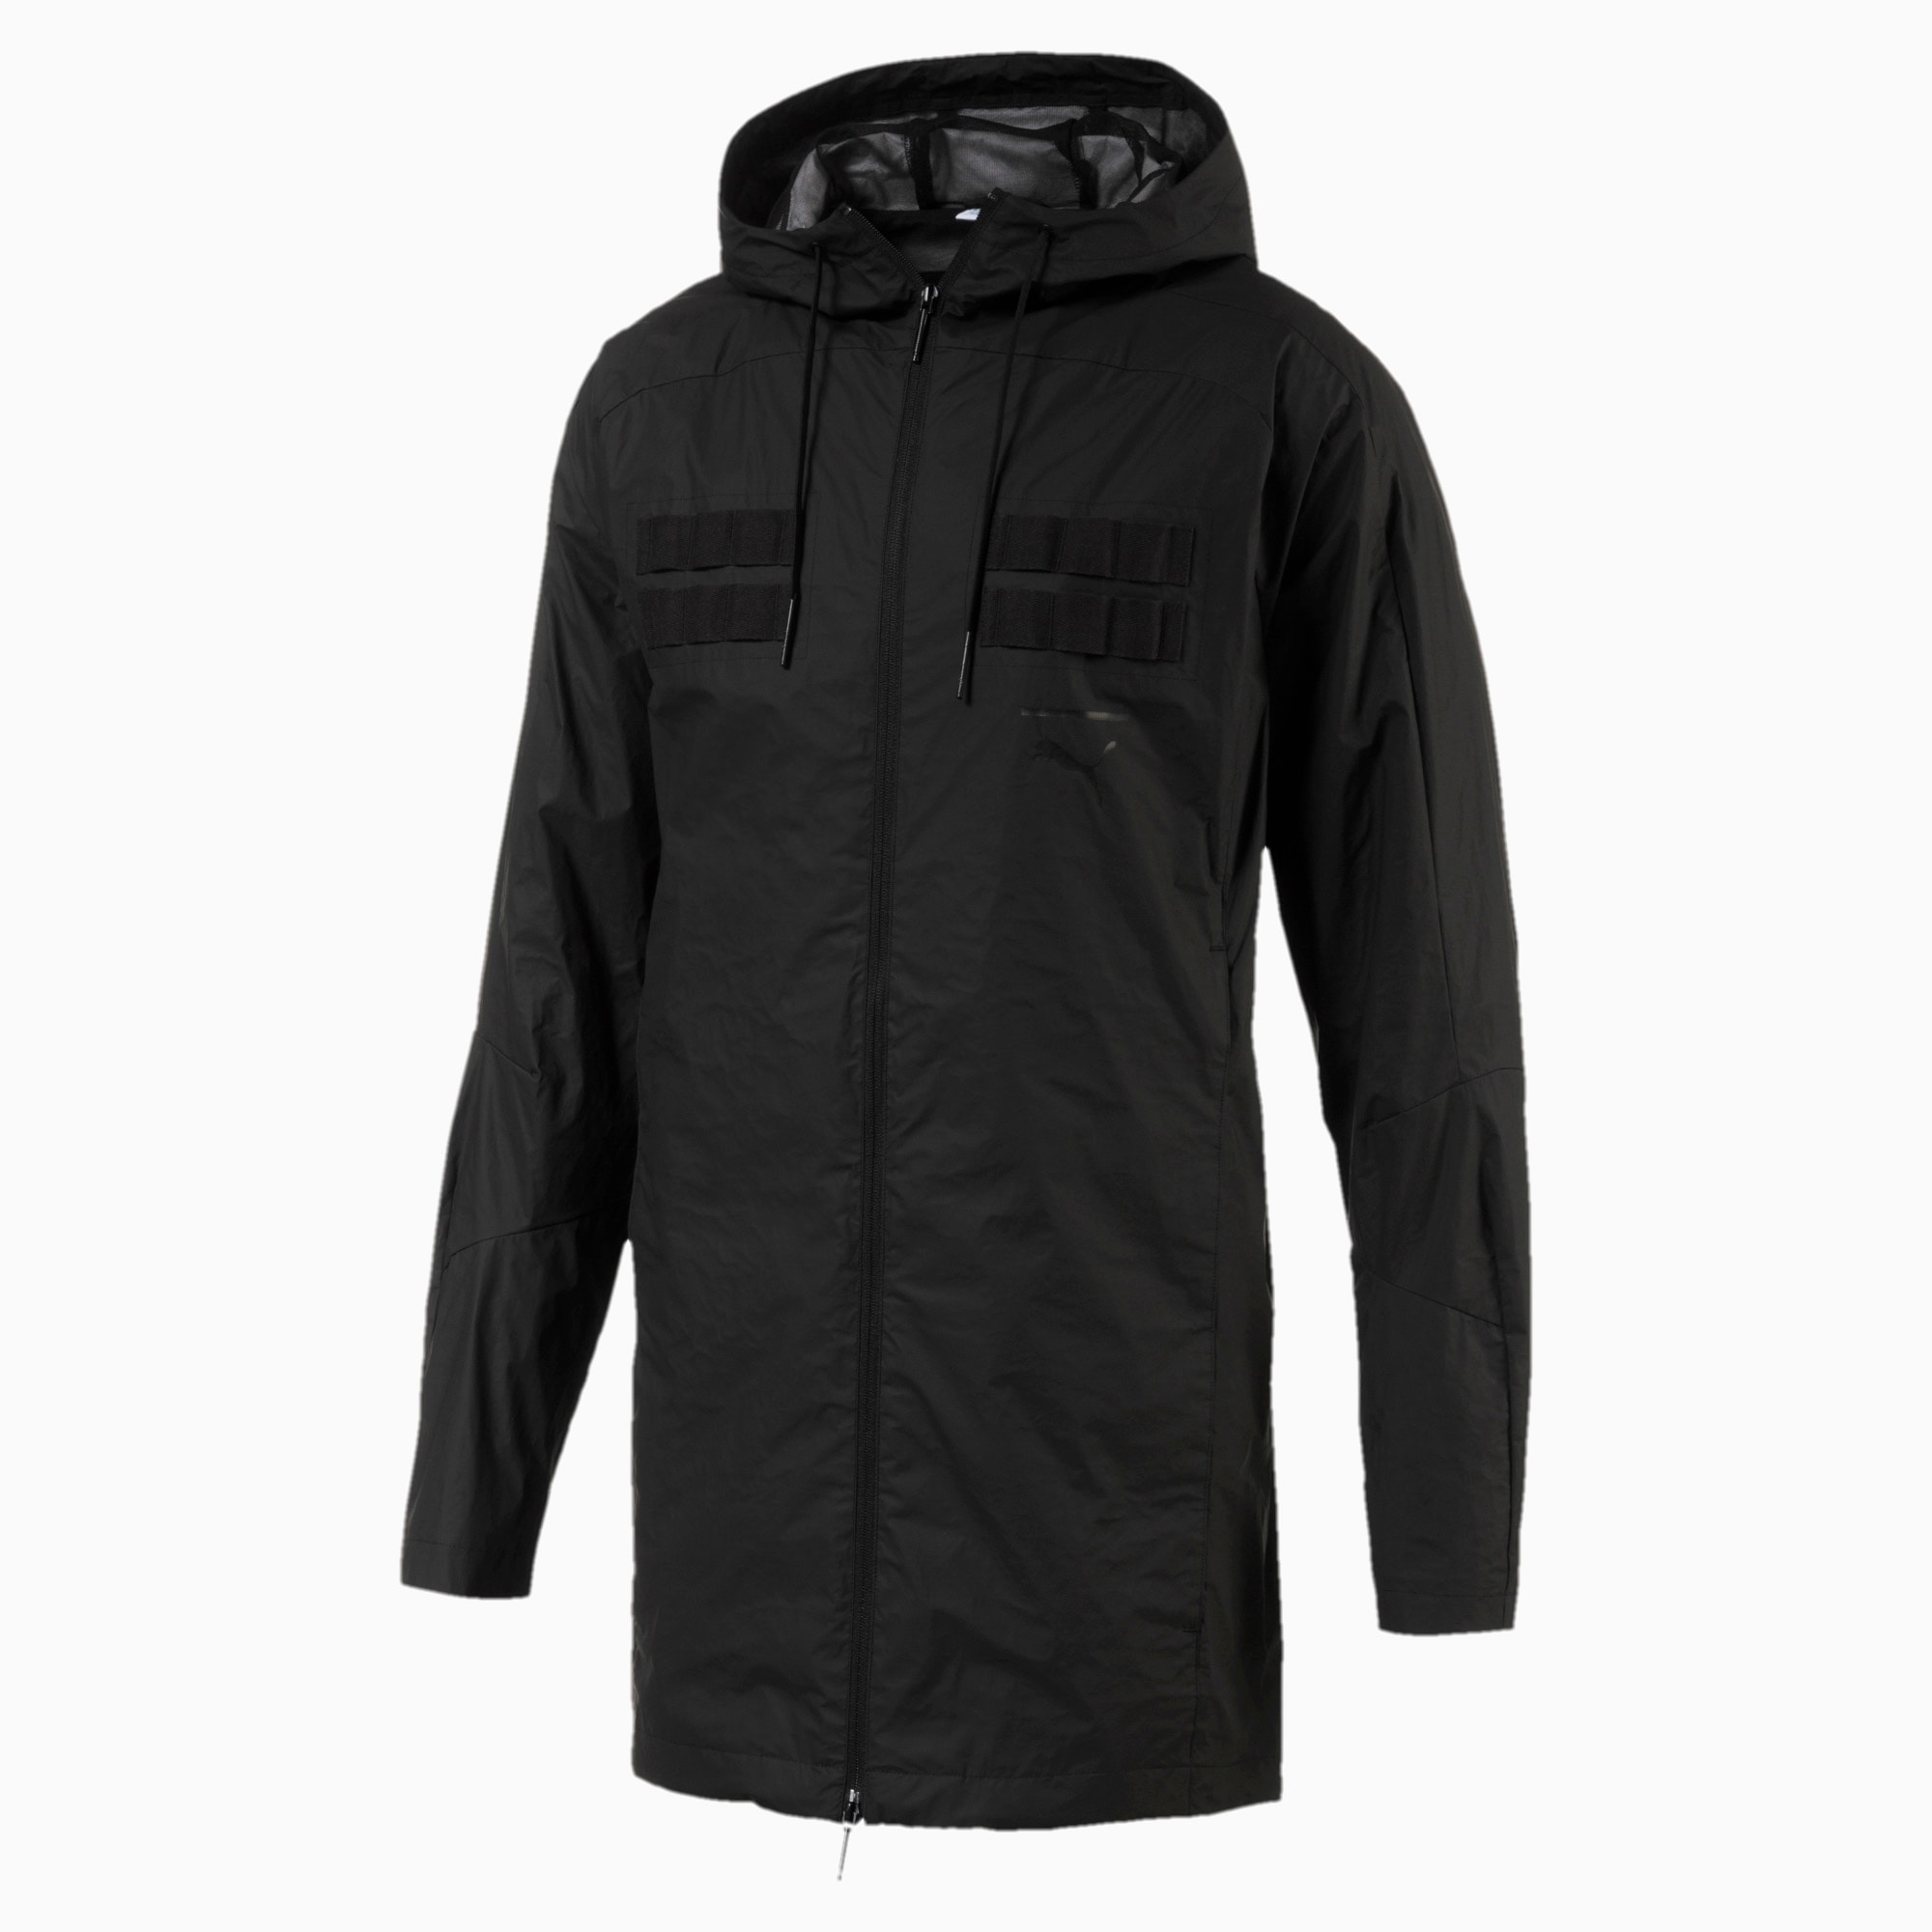 Pace LAB Men's Hooded Jacket | PUMA 